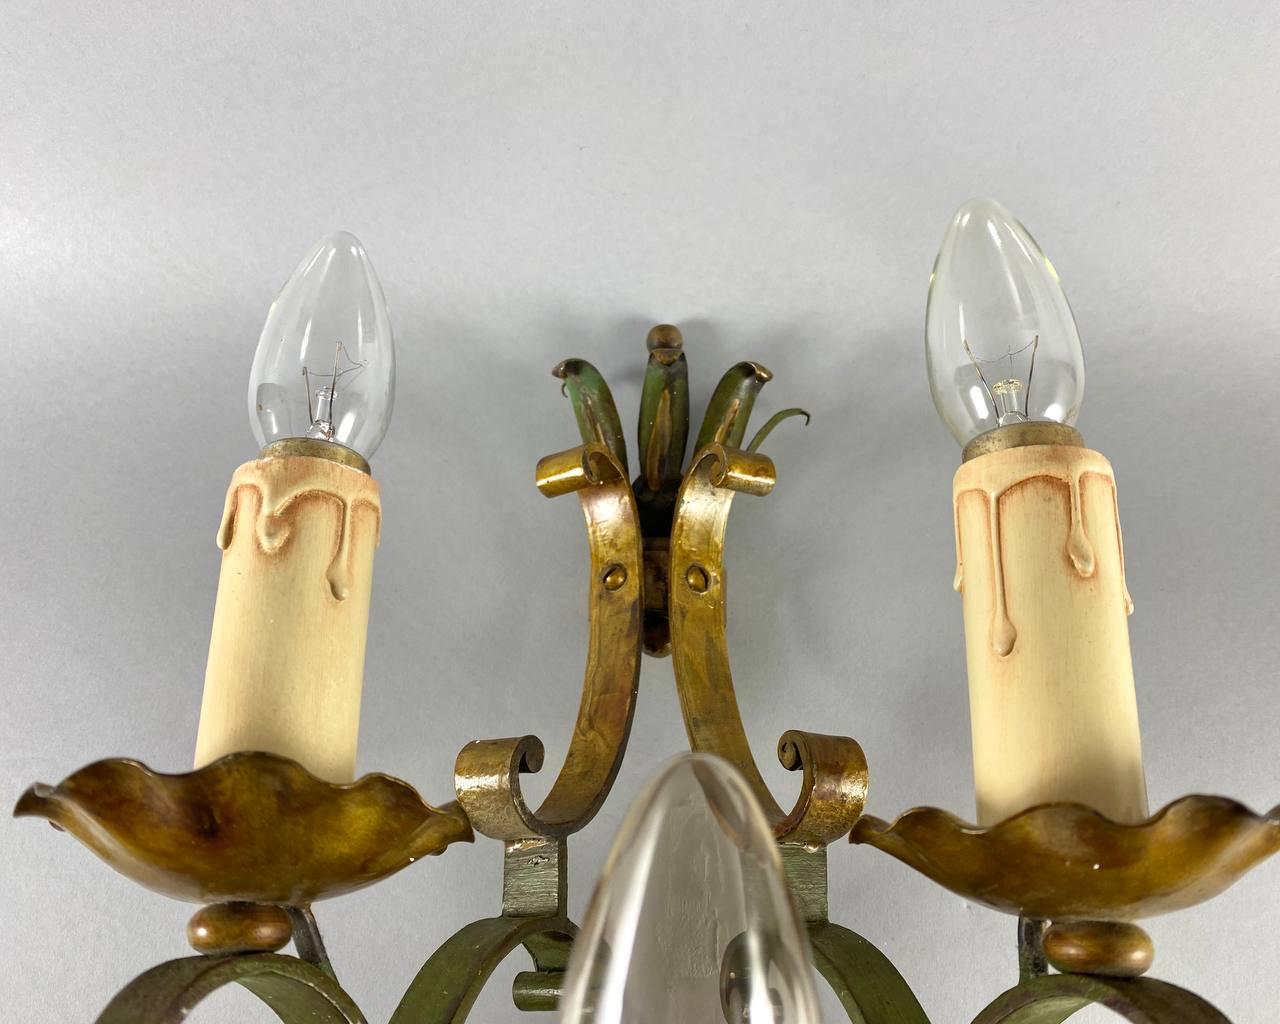 Charming Vintage Wall Sconce For 5 Light Point Metal Tiered Wall Lamp For Sale 1